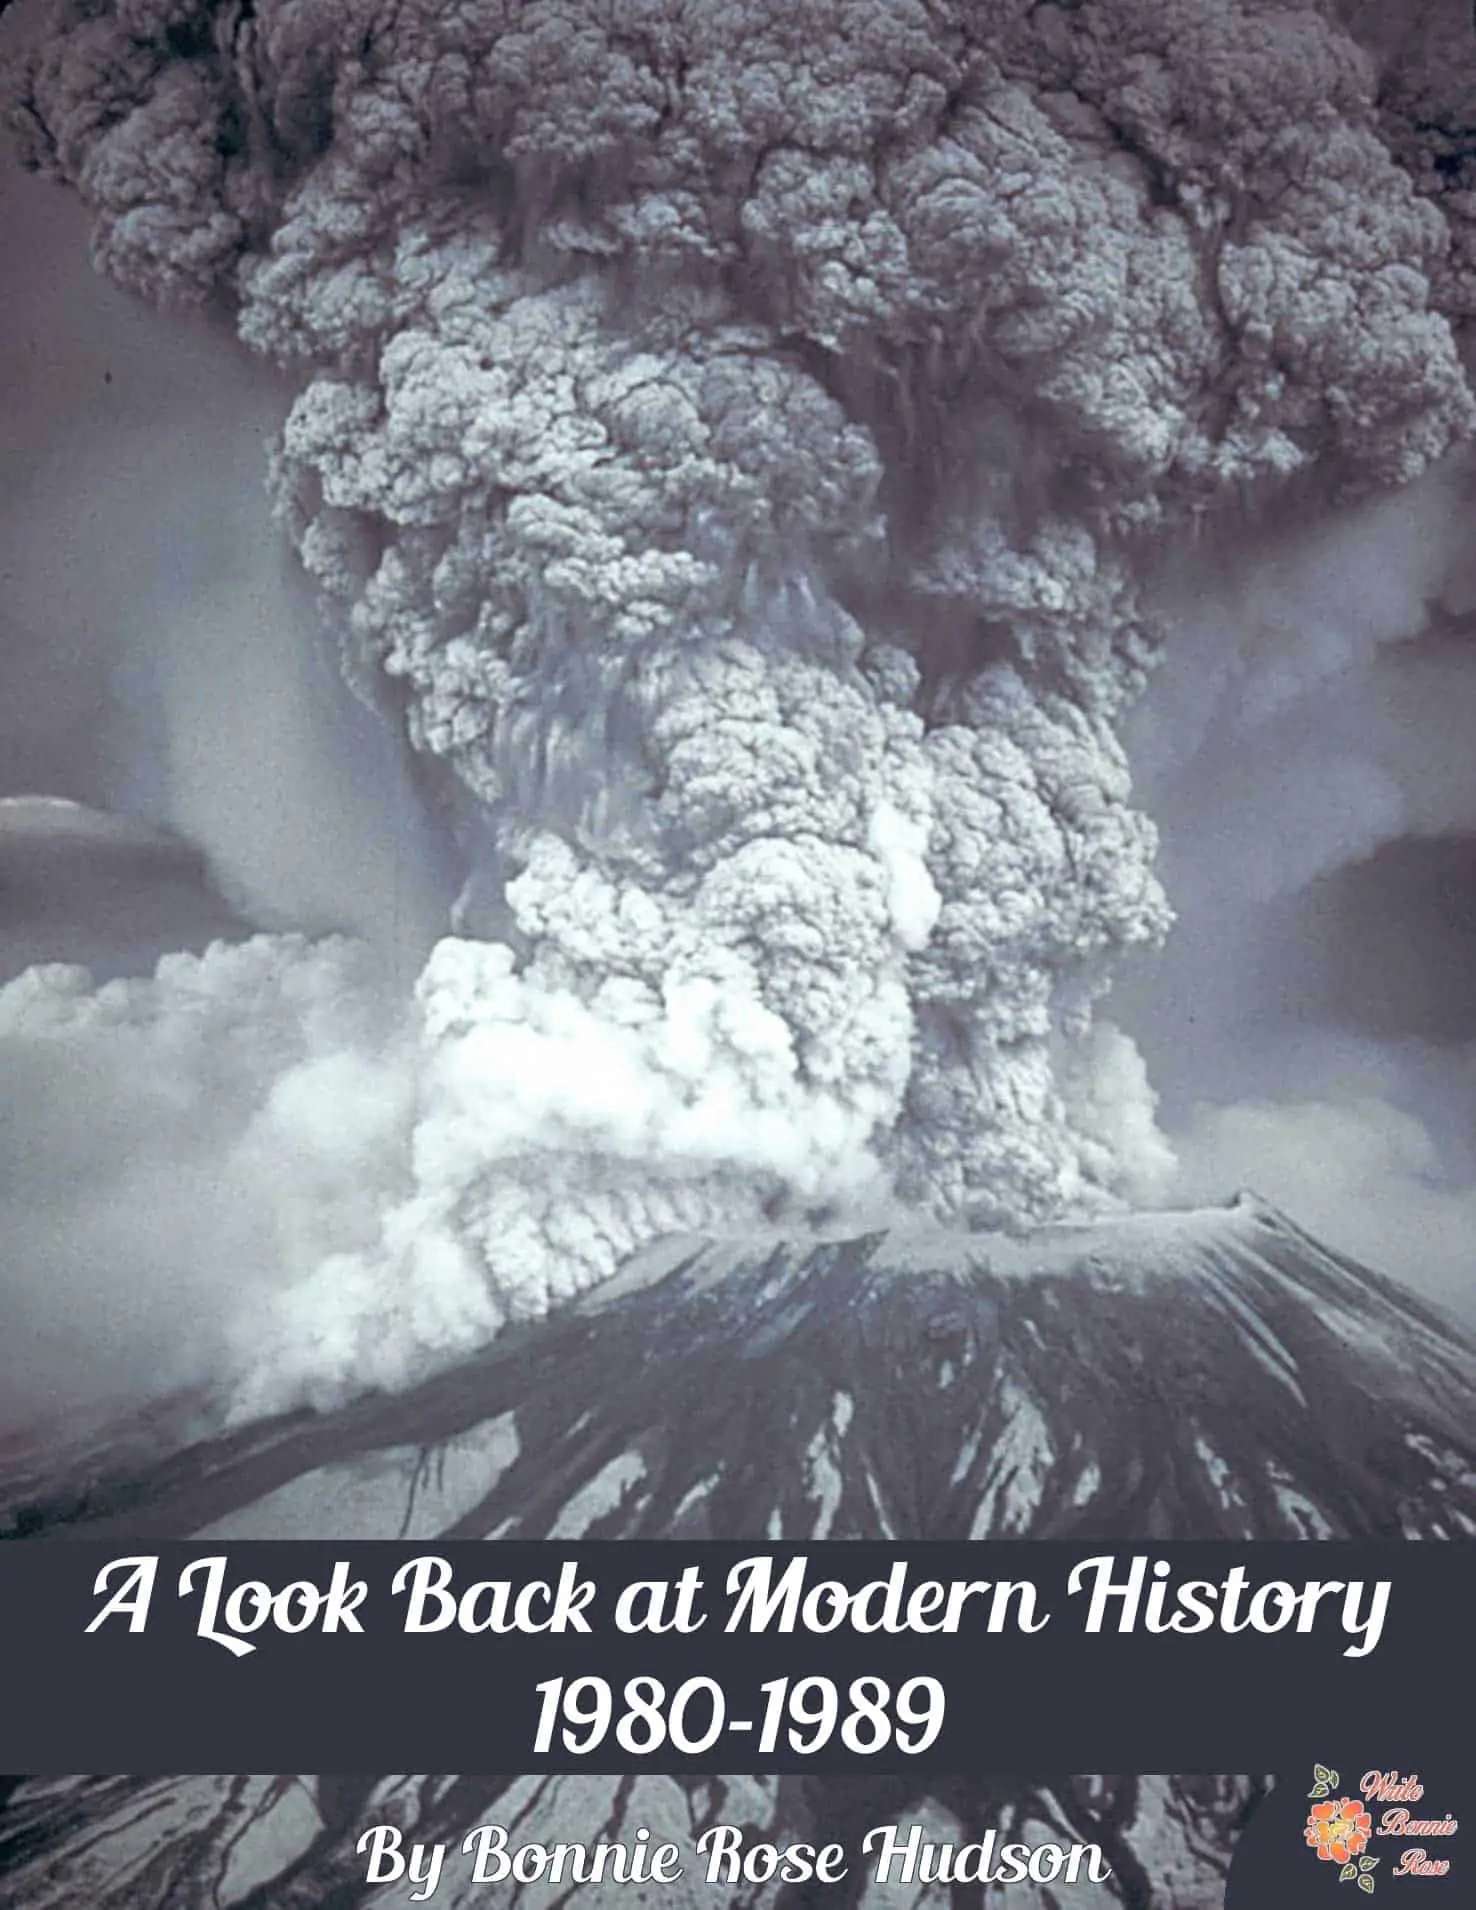 A Look Back at Modern History 1980s text with black and white image of an exploding volcano